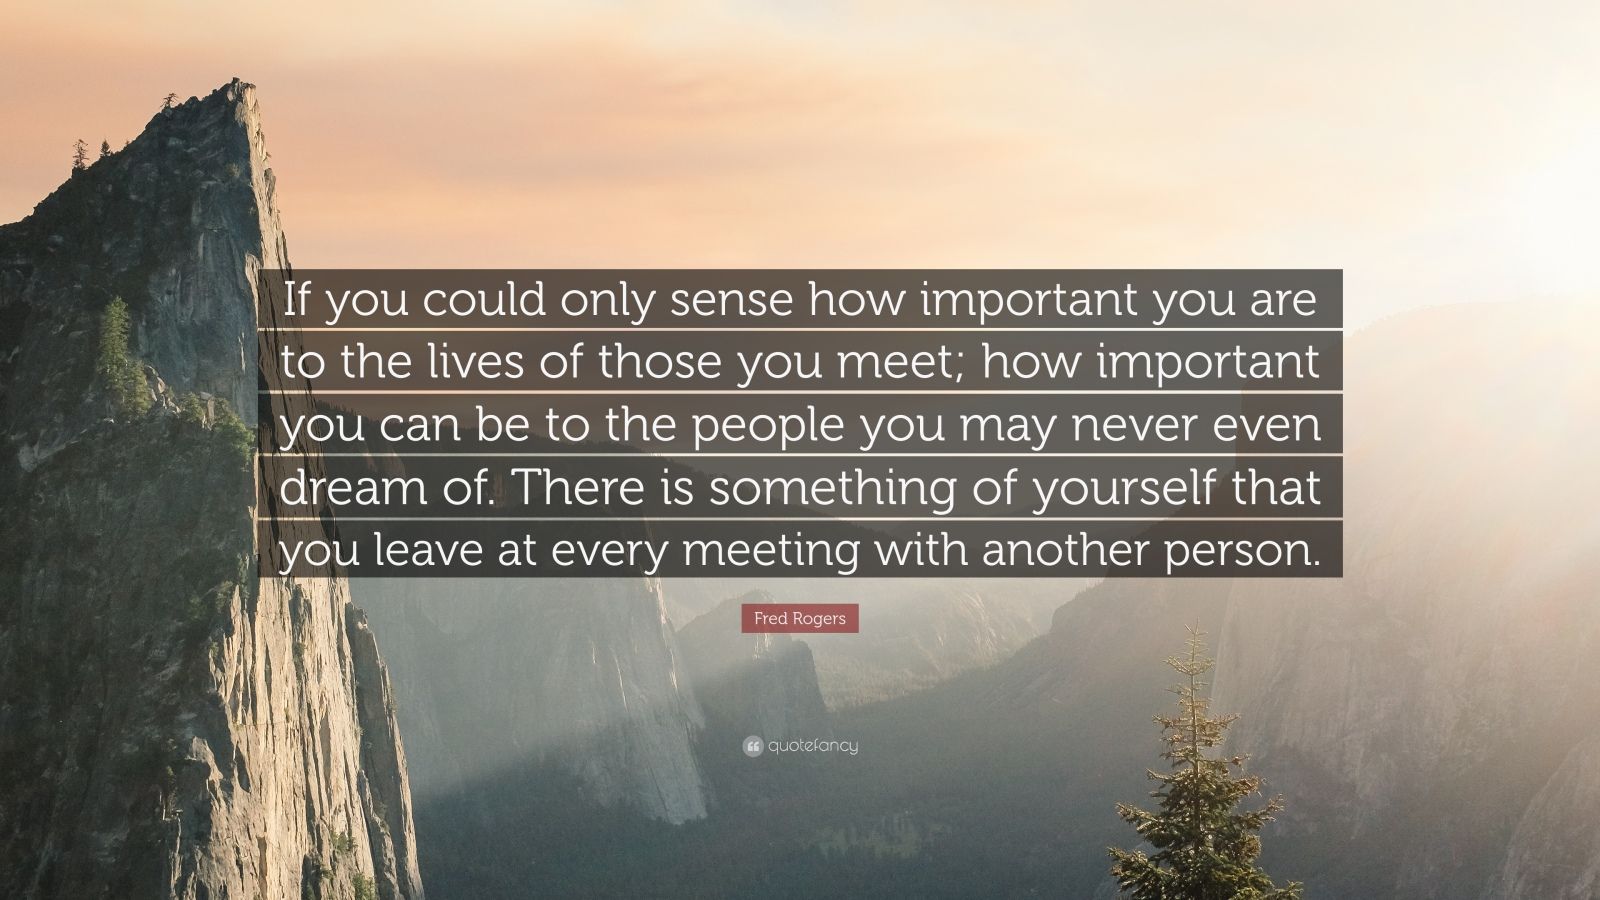 Fred Rogers Quote: “If you could only sense how important you are to the lives of those you meet; how important you can be to the people you.”